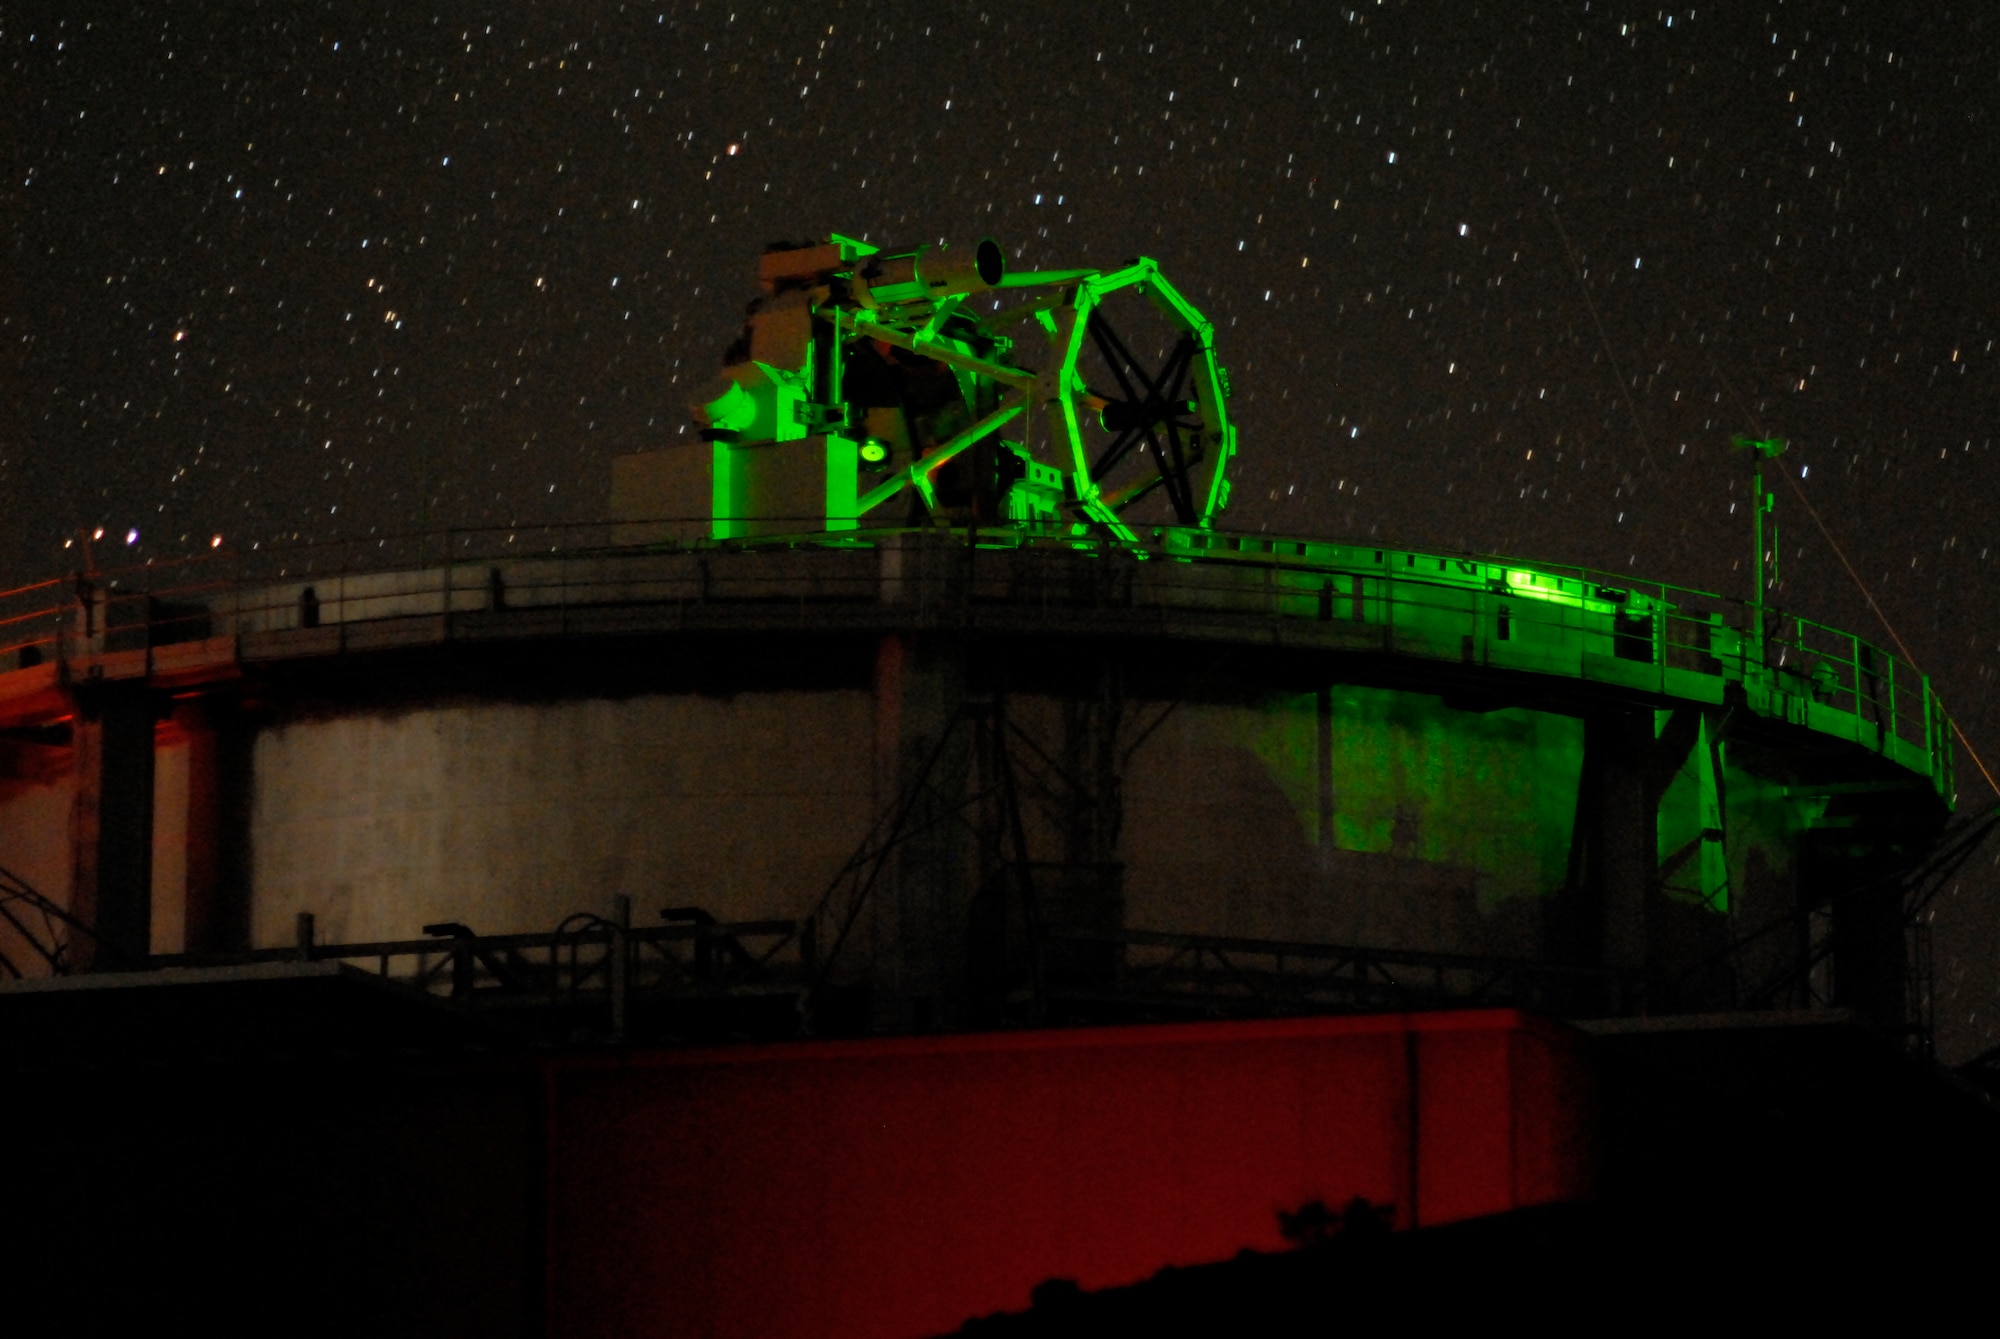 Air Force Research Laboratory’s 3.6-meter, 75-ton Advanced Electro-Optical System (AEOS) telescope under laser illumination at its Directed Energy Directorate’s Air Force Maui Optical and Surveillance Site, Maui, Hawaii.   The illumination resulted from the multi-wave length laser propagation experiments that were completed at over 10,000 feet and over a 90-mile path between Mauna Loa on the island of Hawaii and the Air Force site atop the extinct volcano, Haleakala, on Maui, Hawaii.      U.S. Air Force Photo by Rob Ratkowski                            